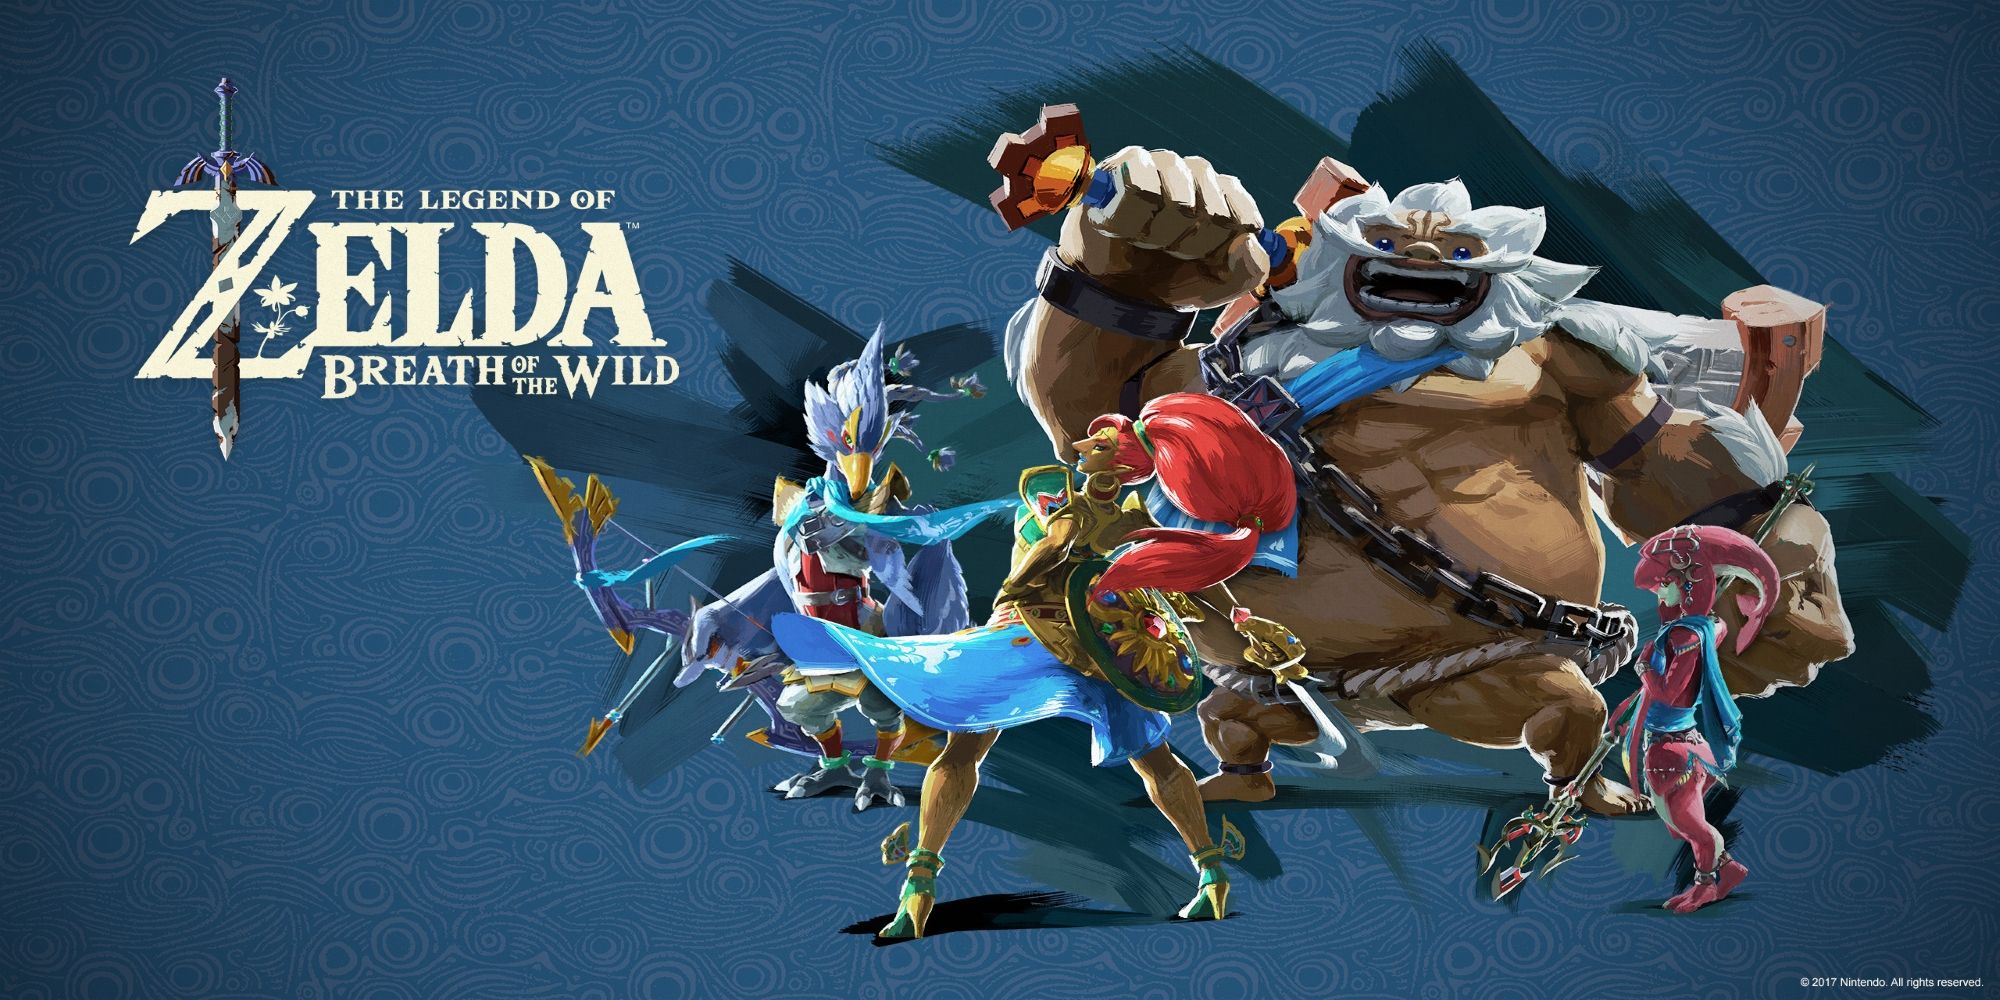 The Legend of Zelda: Breath of the Wild Champions, Revali, Urbosa, Daruk, and Mipha pose in front of a blue background.